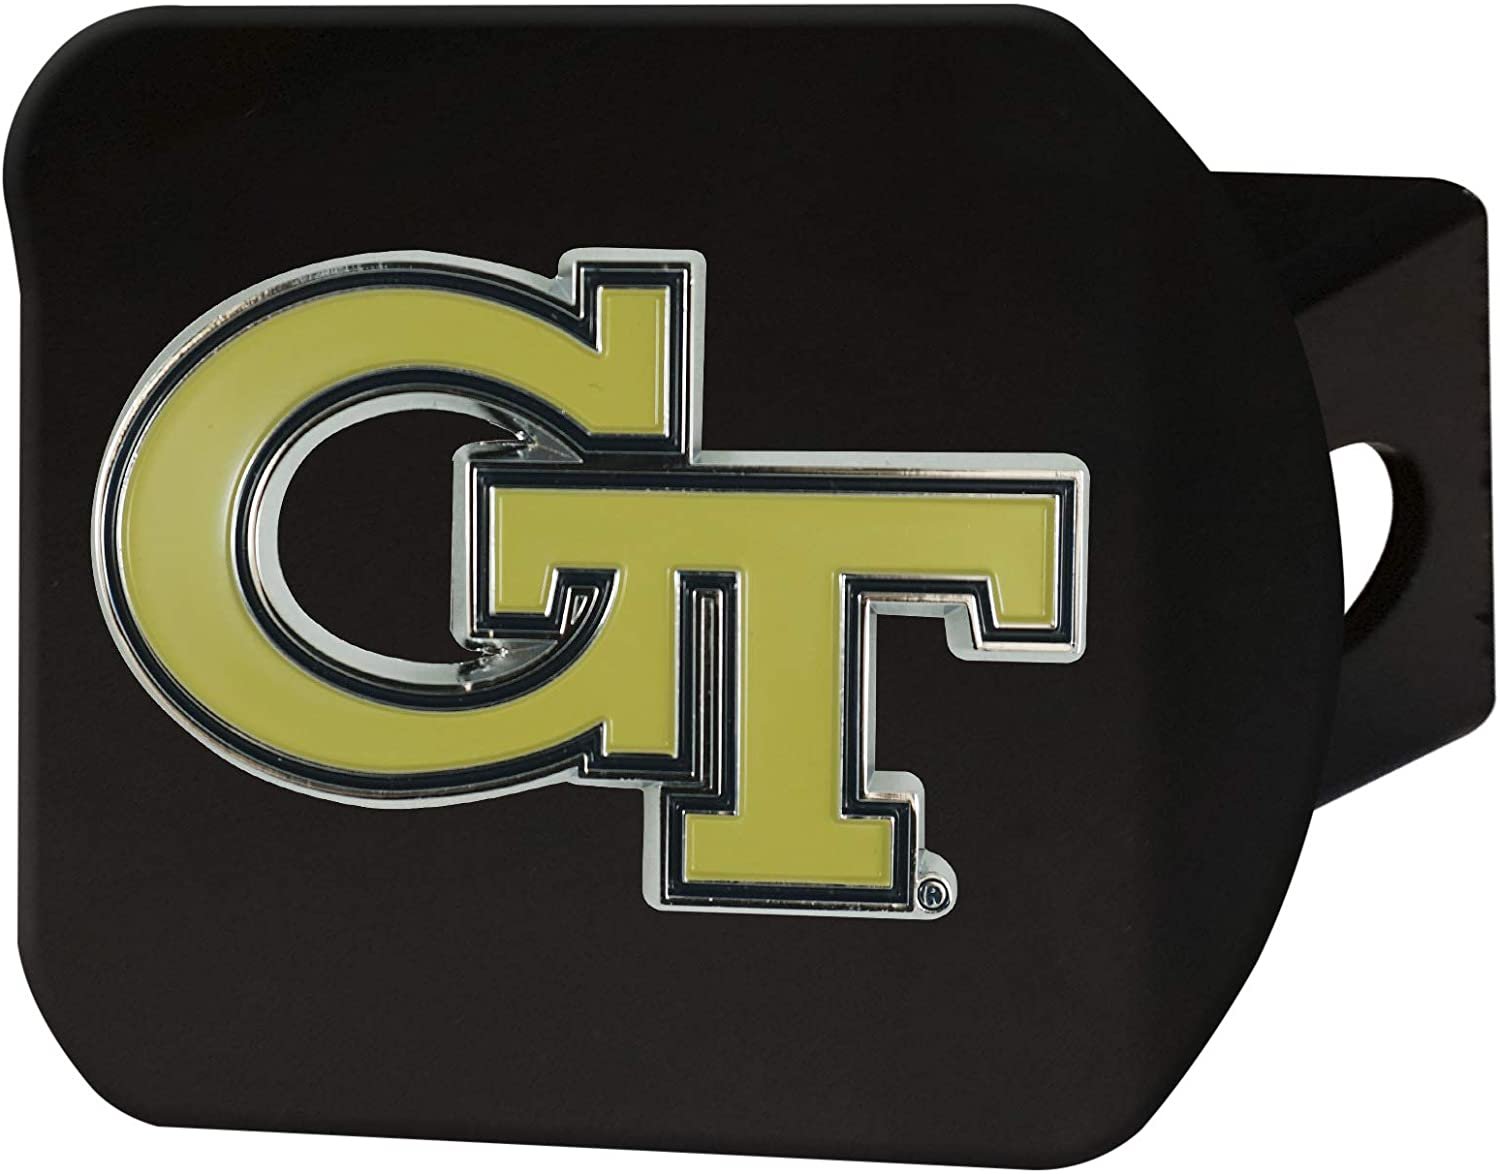 Georgia Tech Yellow Jackets Hitch Cover Black Solid Metal with Raised Color Metal Emblem 2" Square Type III University